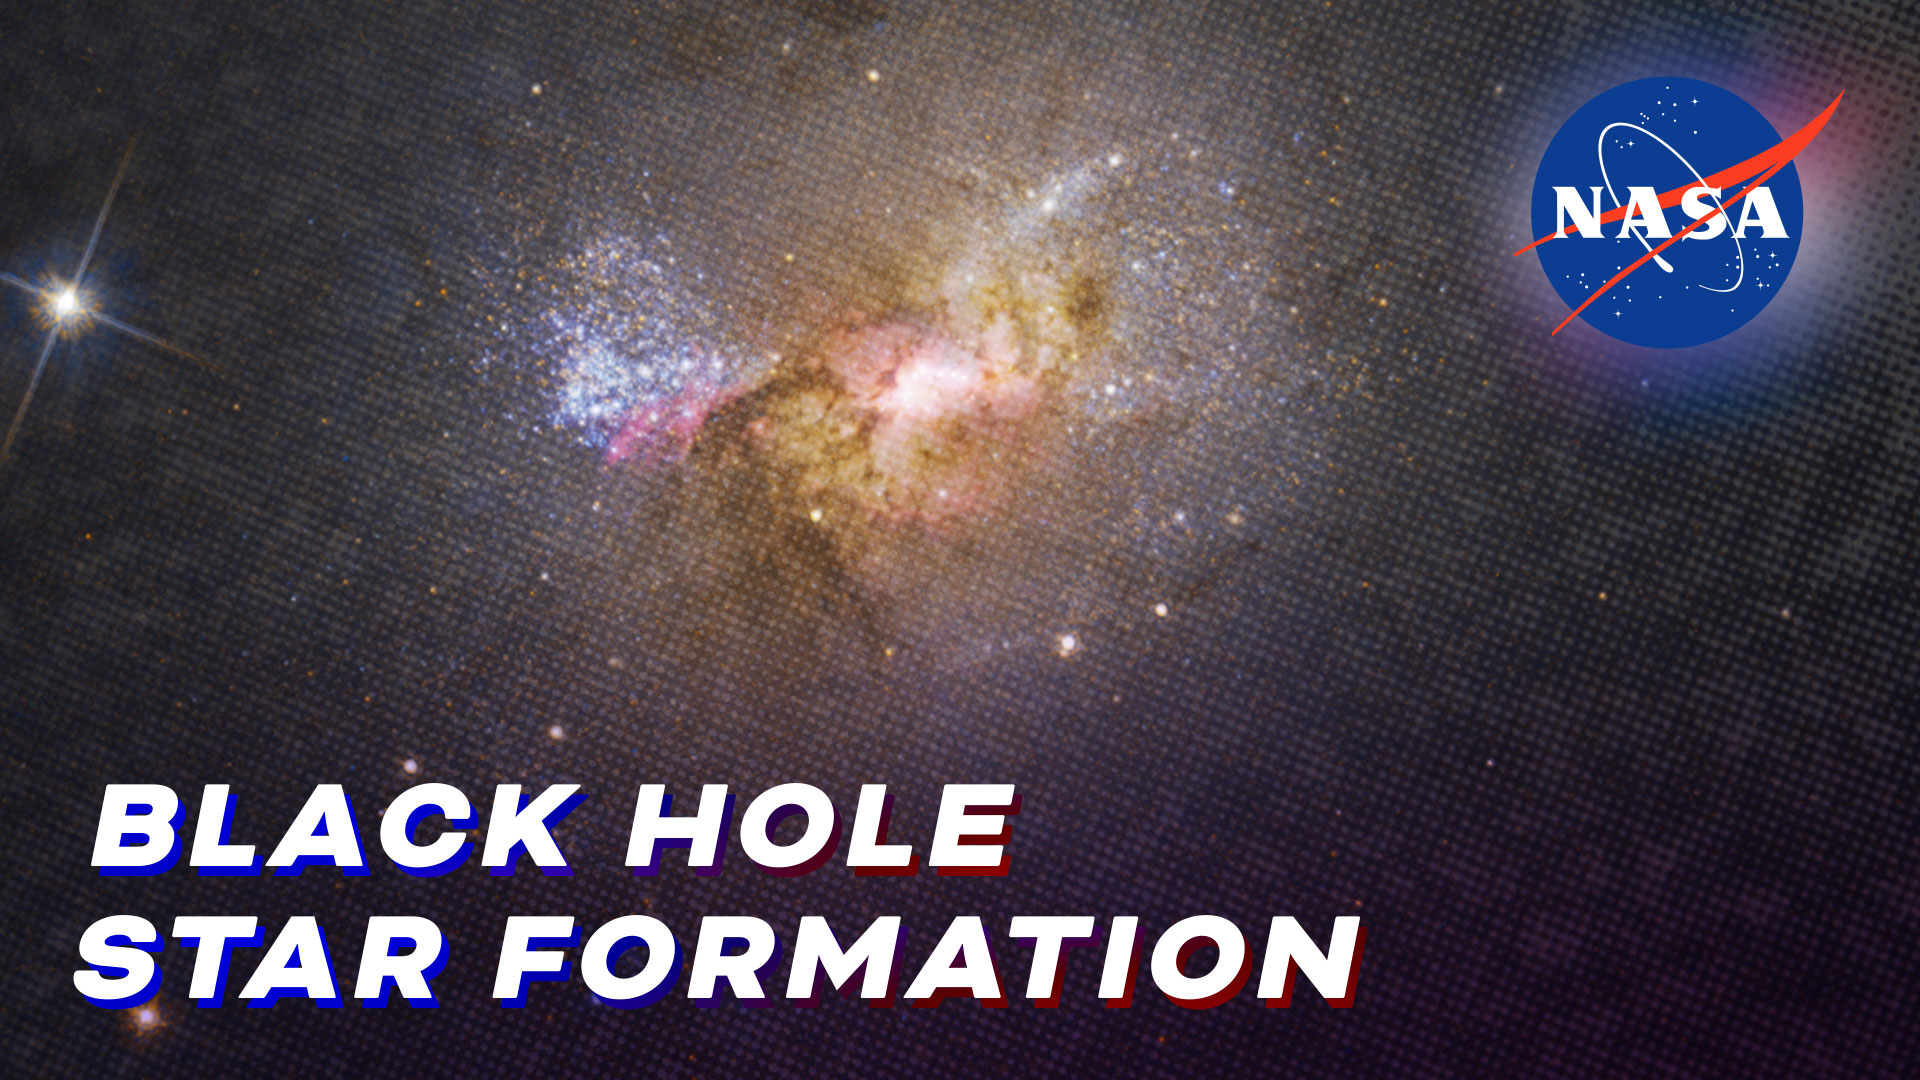 Preview Image for HUBBLE FINDS A BLACK HOLE IGNITING STAR FORMATION IN A DWARF GALAXY